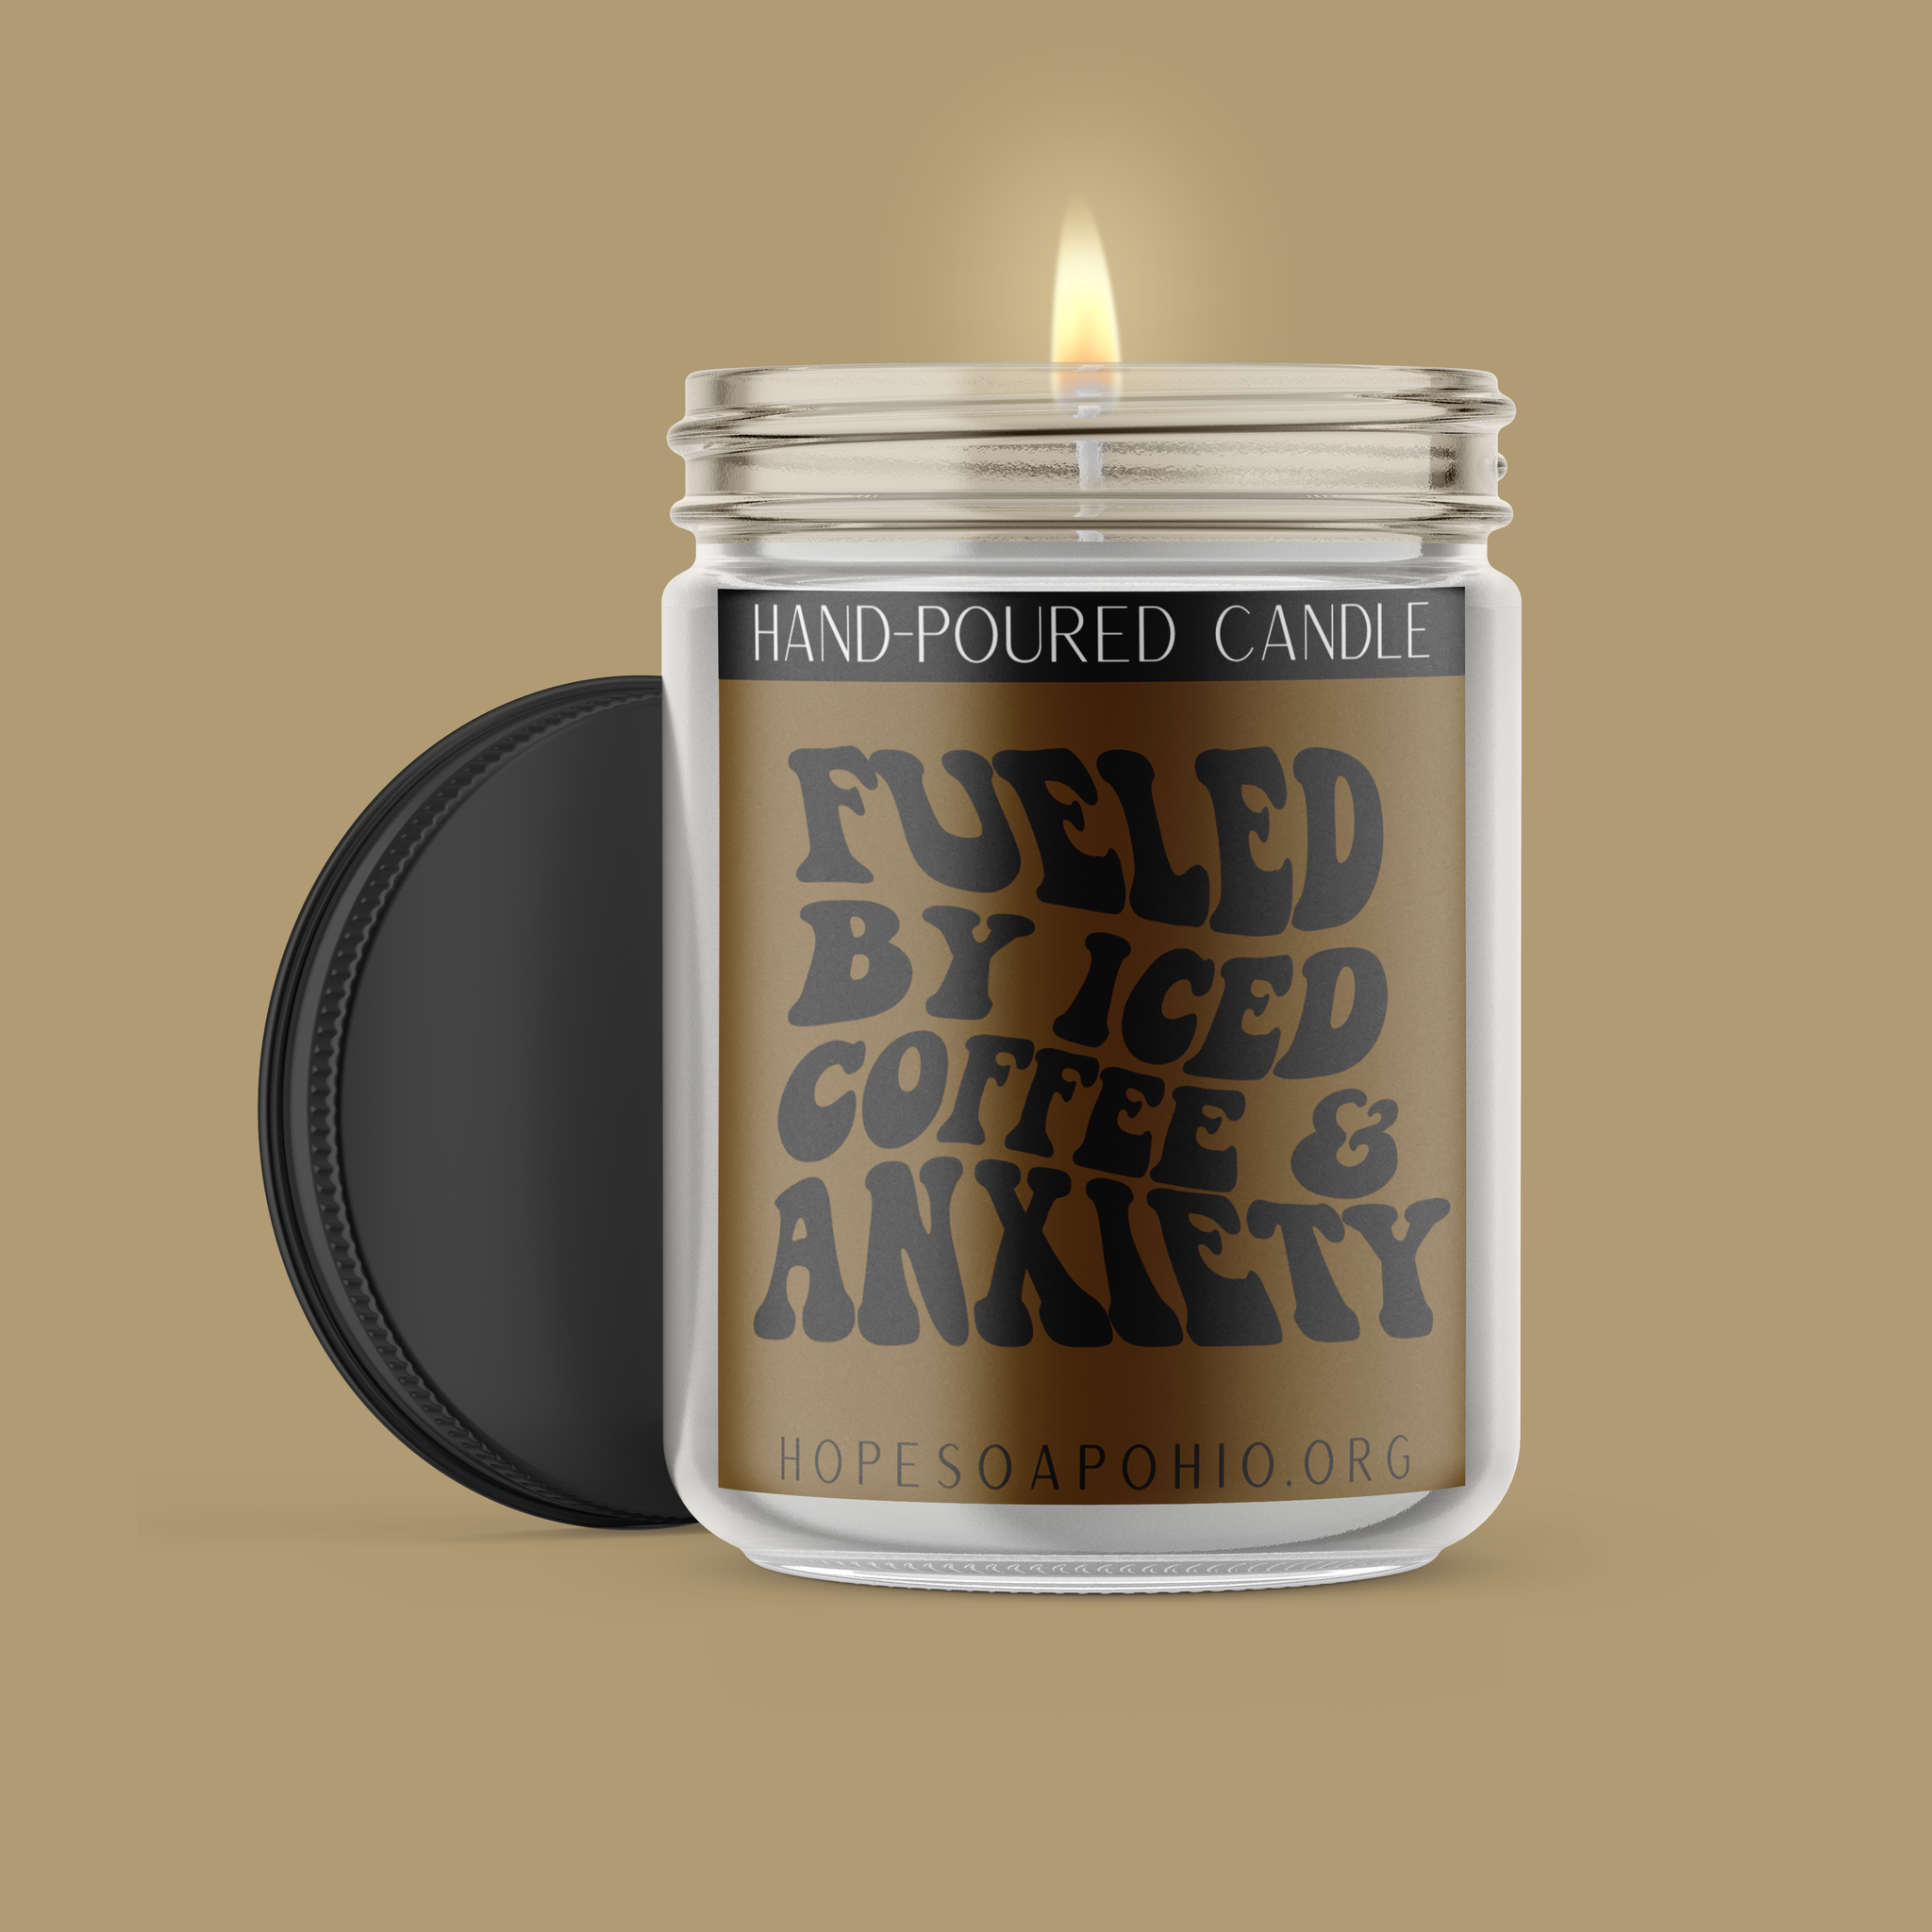 Fueled By Iced Coffee & Anxiety Candle - HOPESOAPOHIO